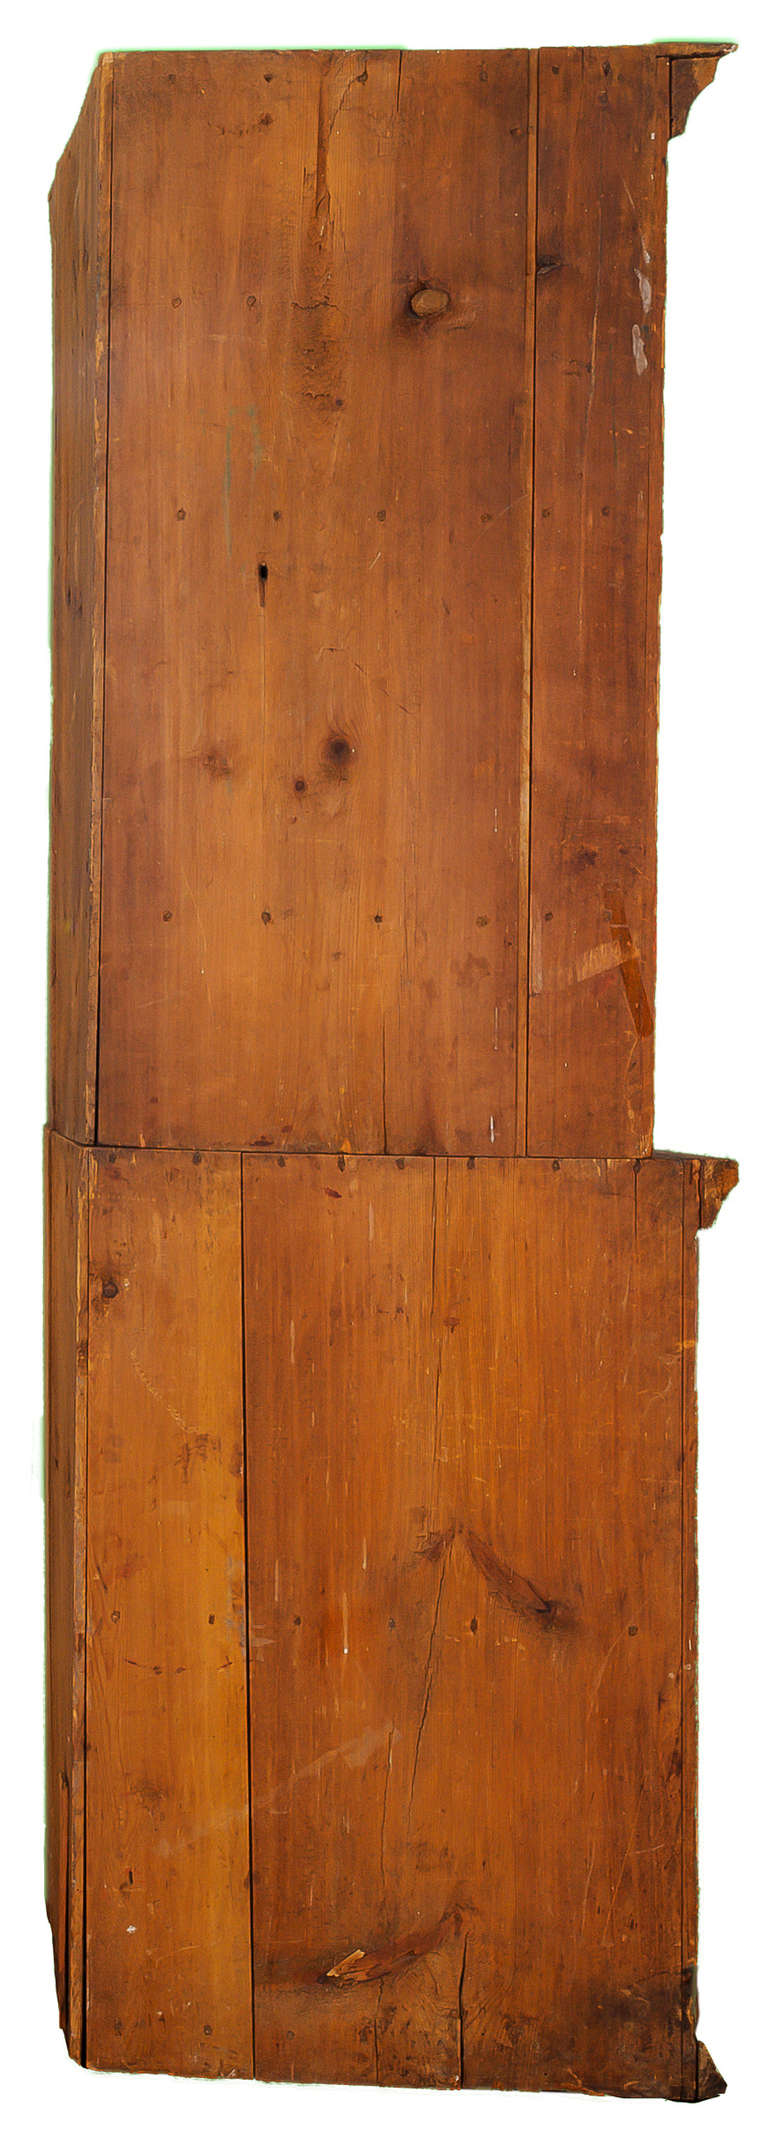 This two-piece corner cupboard has a barrel front. The 